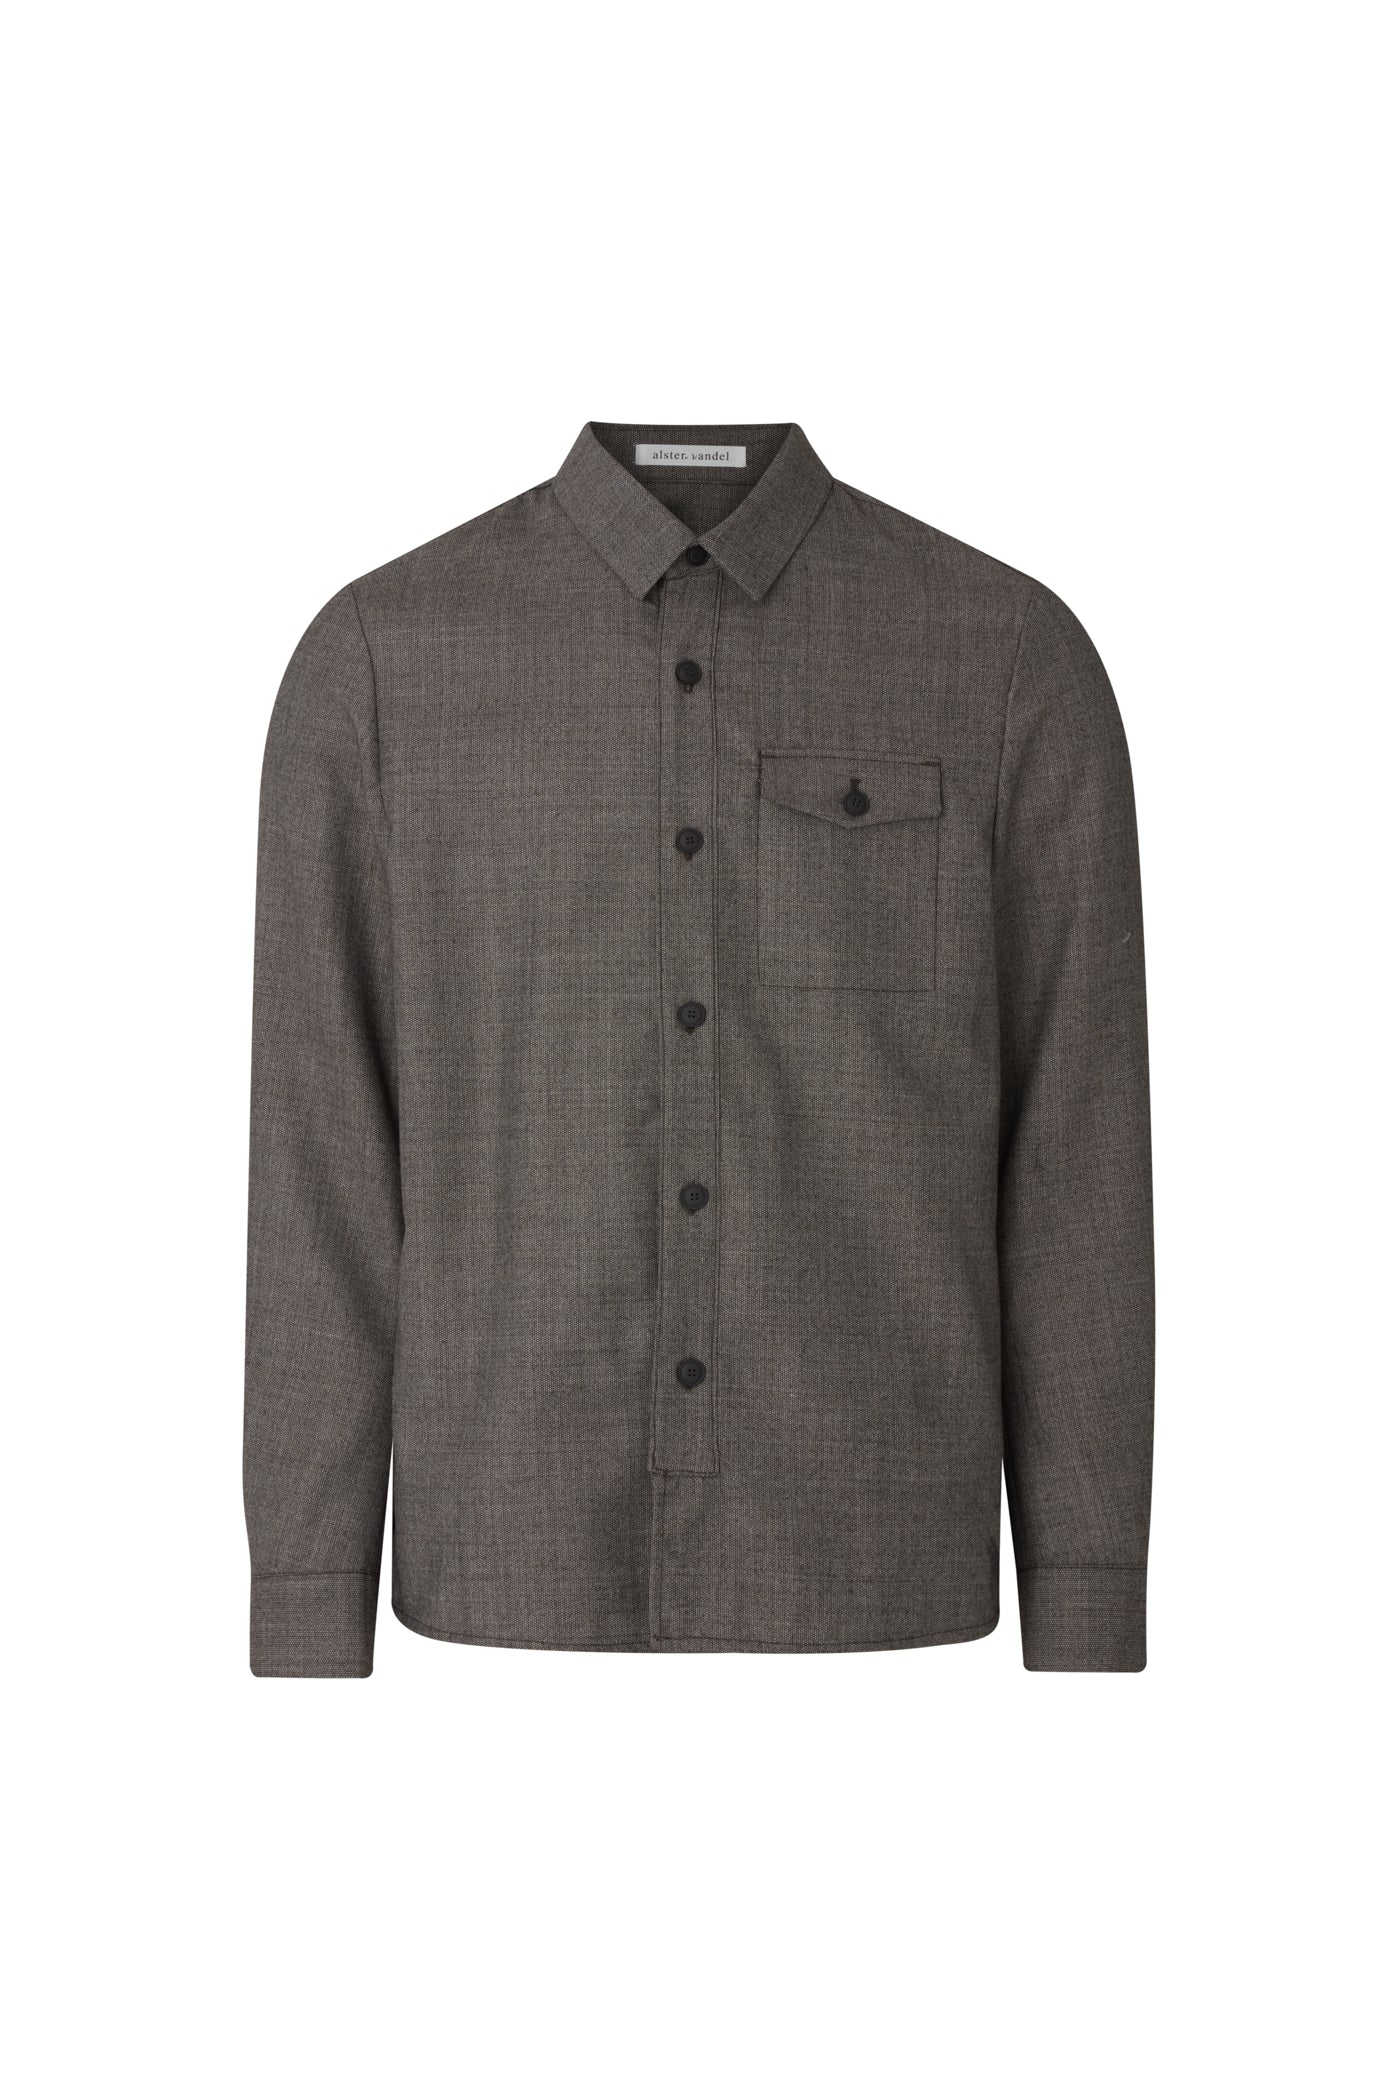 Bodie wool structure overshirt